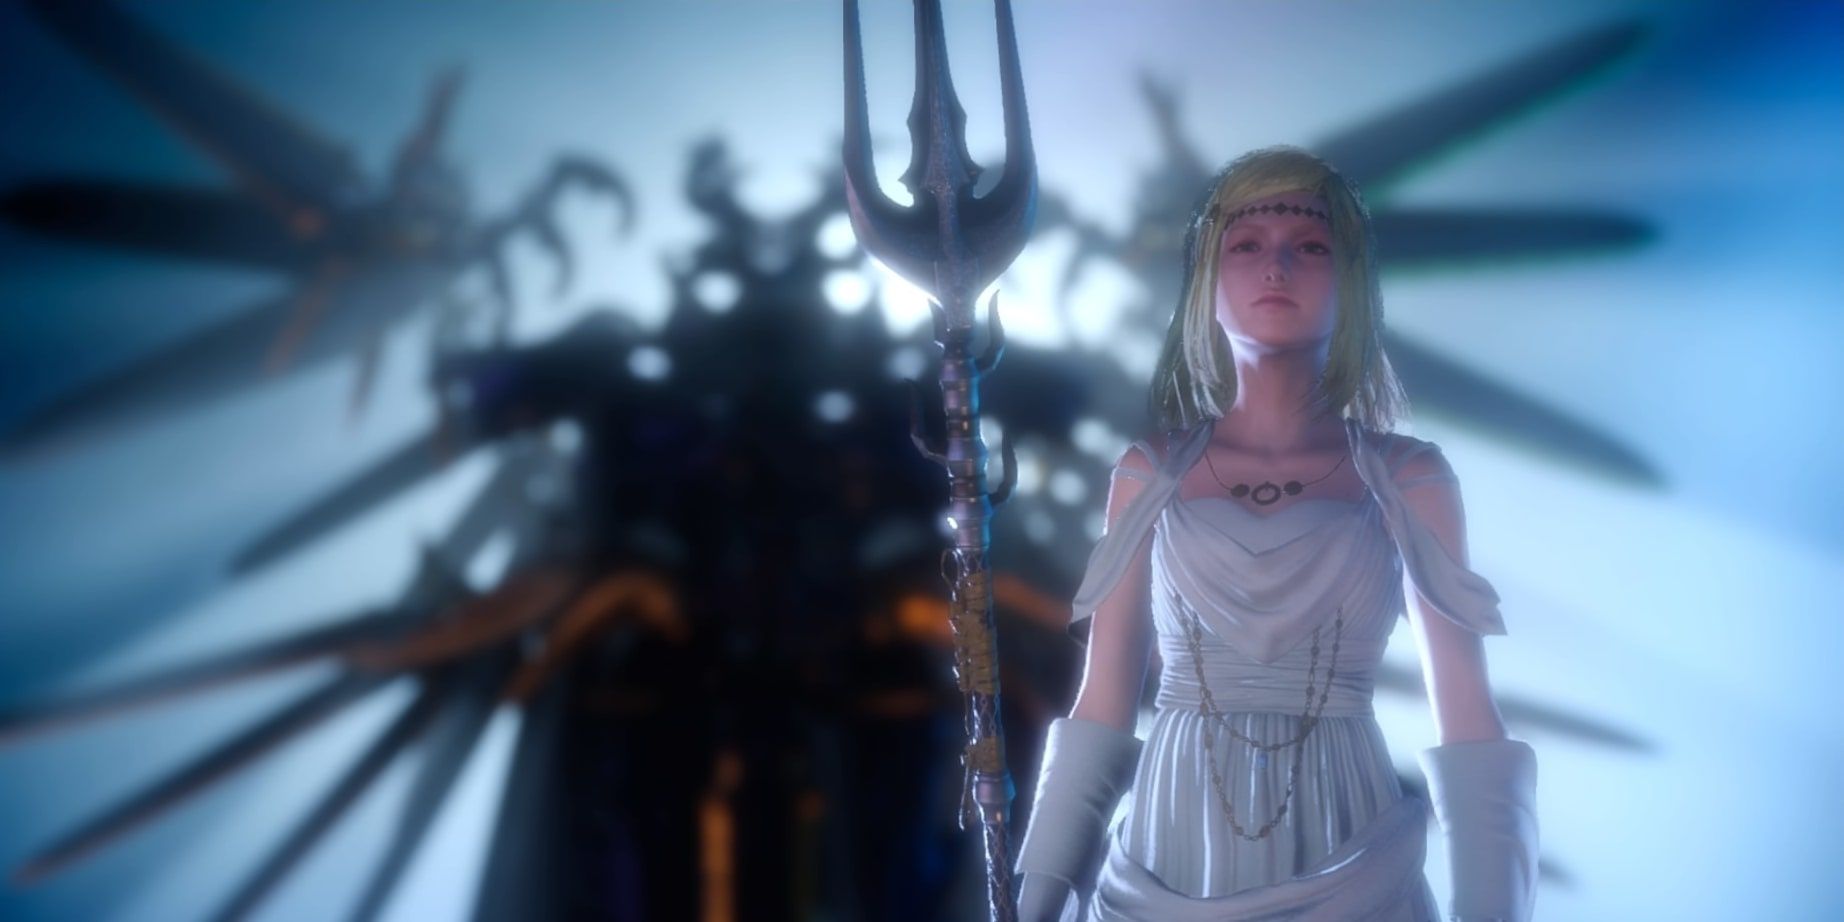 Trident of the oracle held by Aera while Bahamut stands blurred behind her